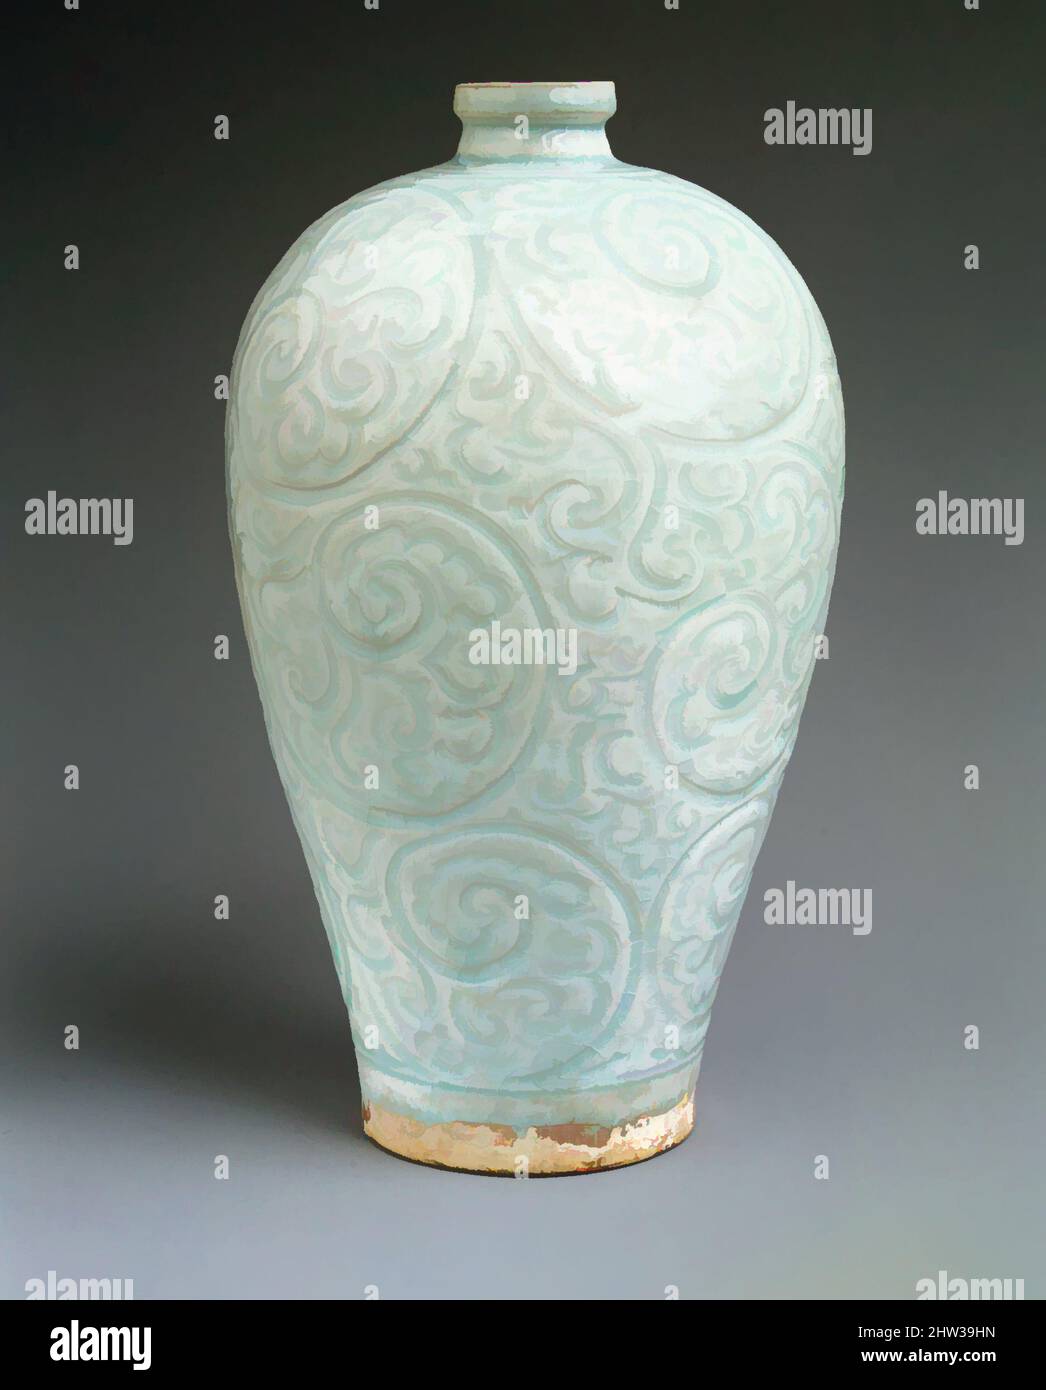 Art inspired by Vase in Meiping Shape, Southern Song (1127–1279)–Yuan (1271–1368) dynasty, late 13th–first half of the 14th century, China, Porcelain with incised and carved design under celadon glaze (Jingdezhen Qingbai ware), H. 12 3/8 in. (31.4 cm), Ceramics, The lively design of, Classic works modernized by Artotop with a splash of modernity. Shapes, color and value, eye-catching visual impact on art. Emotions through freedom of artworks in a contemporary way. A timeless message pursuing a wildly creative new direction. Artists turning to the digital medium and creating the Artotop NFT Stock Photo